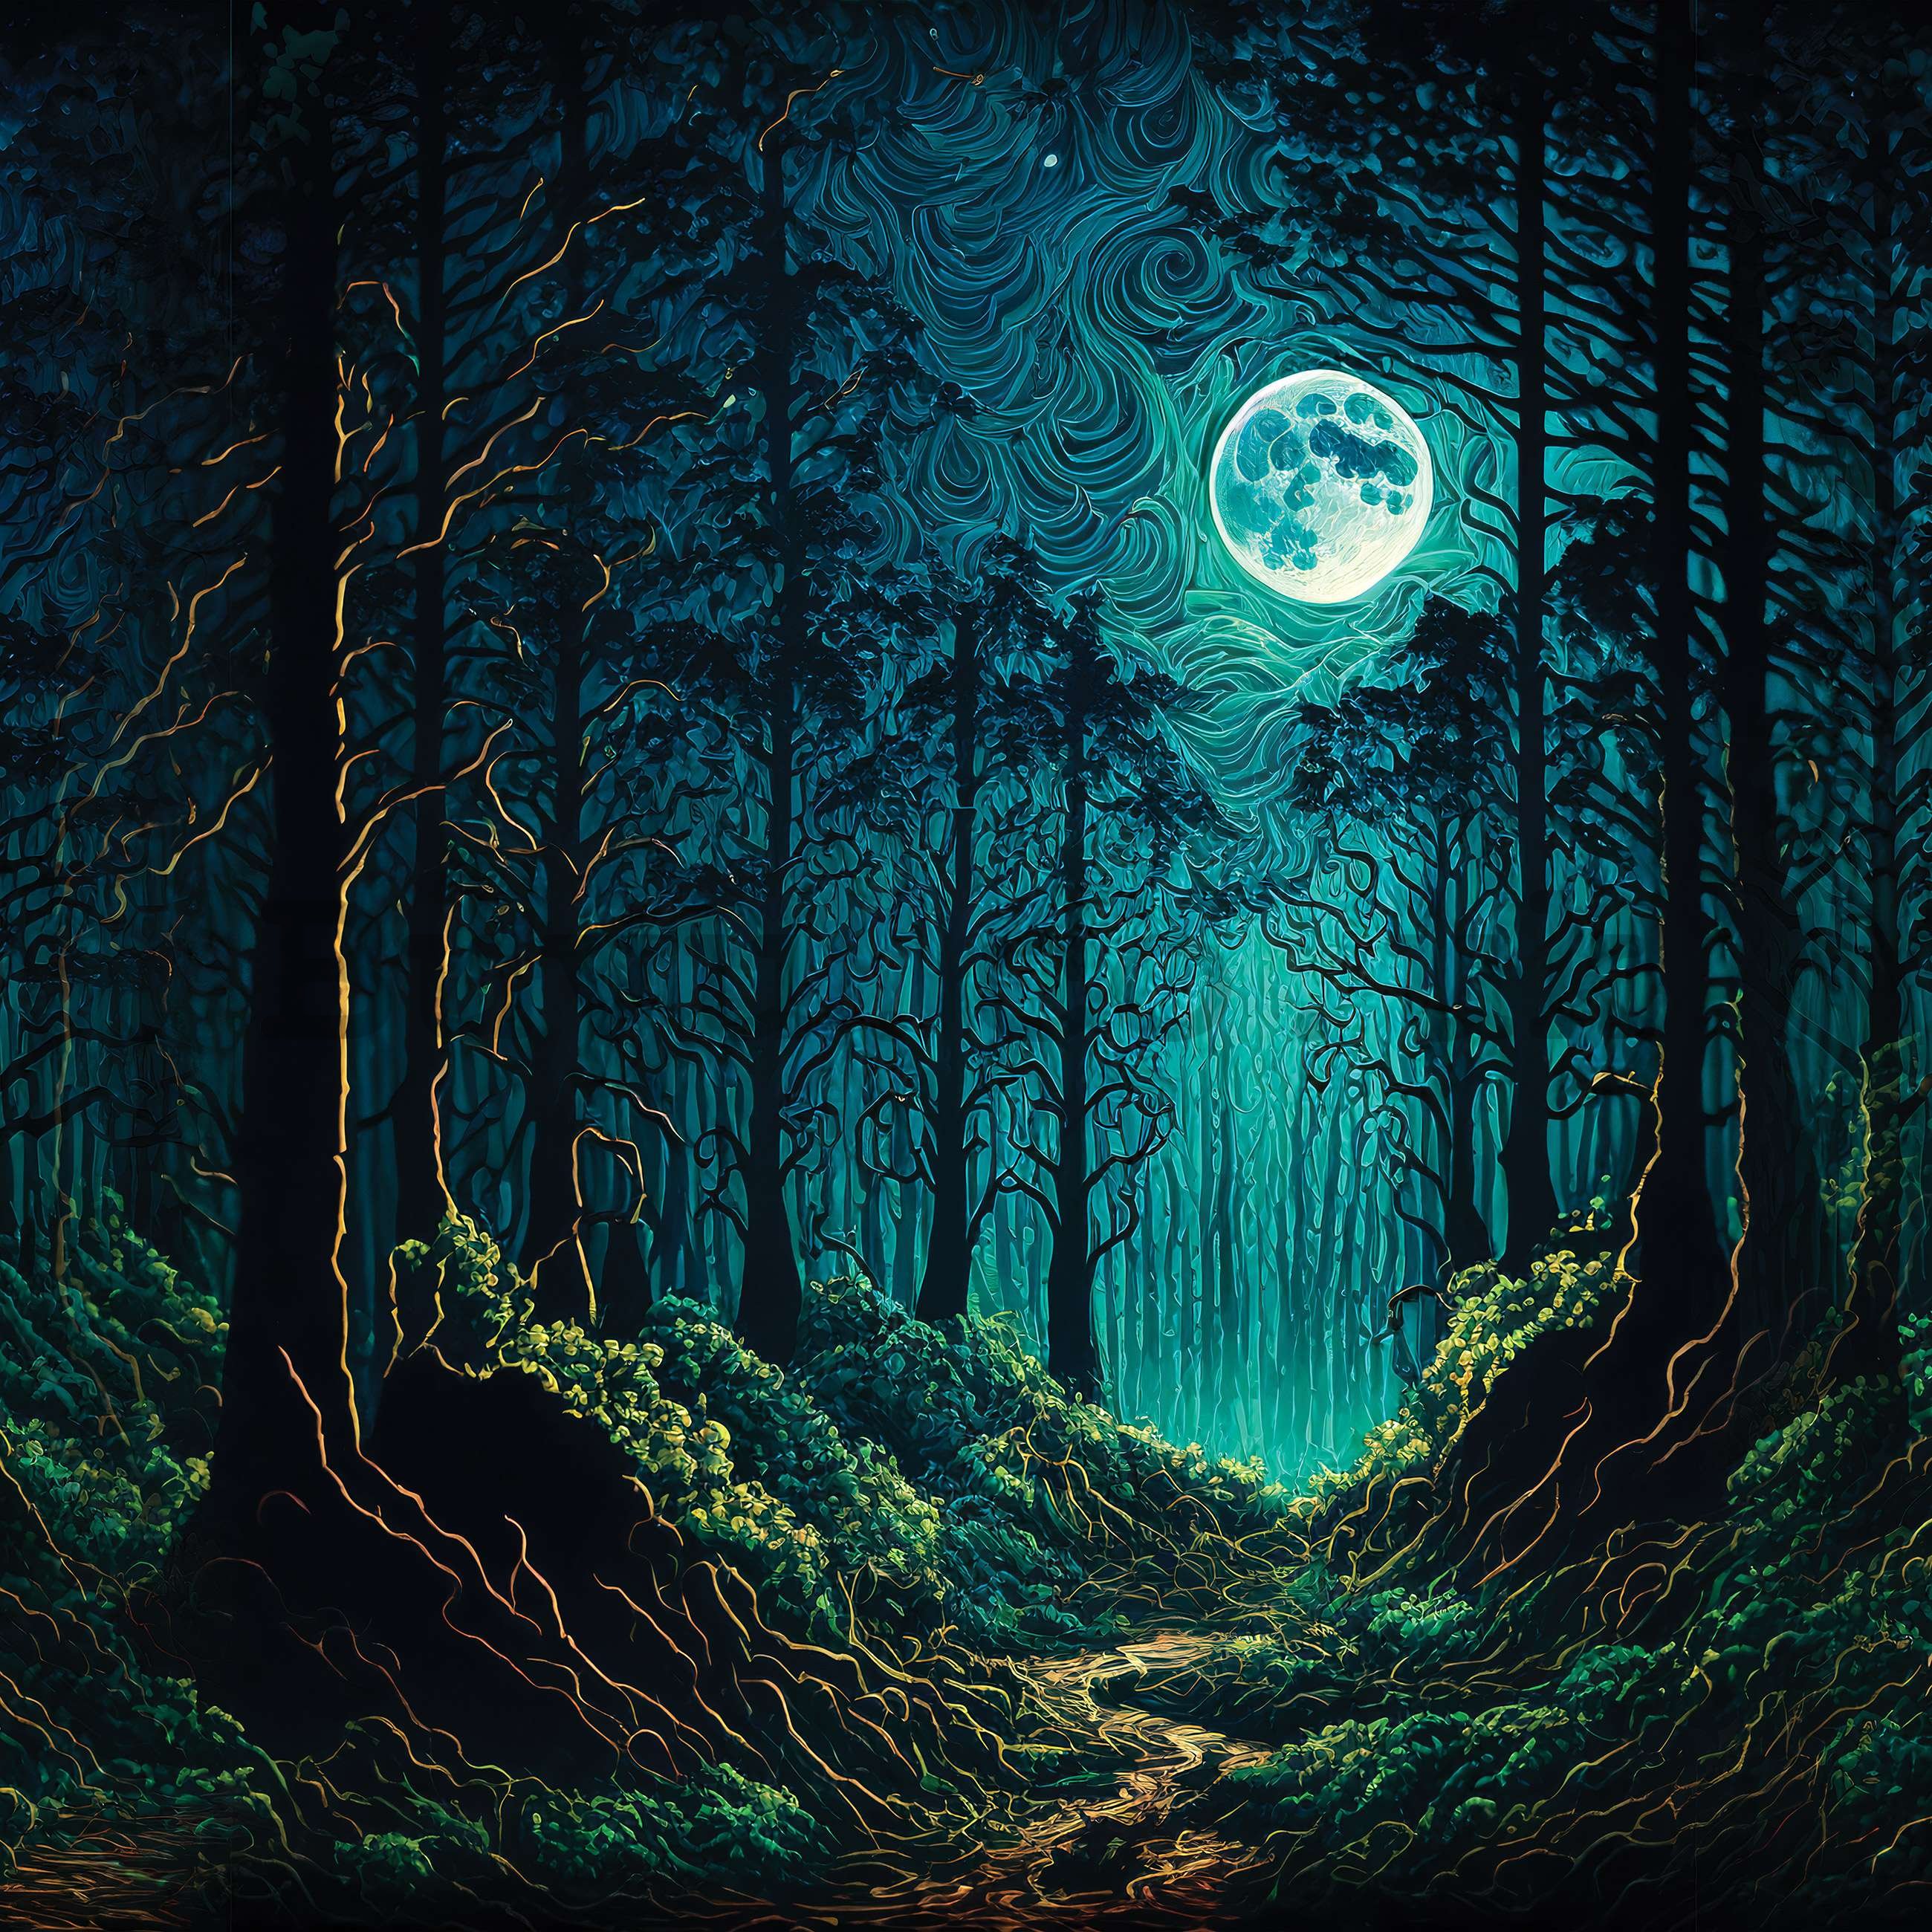 Wall mural vlies: Enchanted forest in the moonlight - 416x254 cm